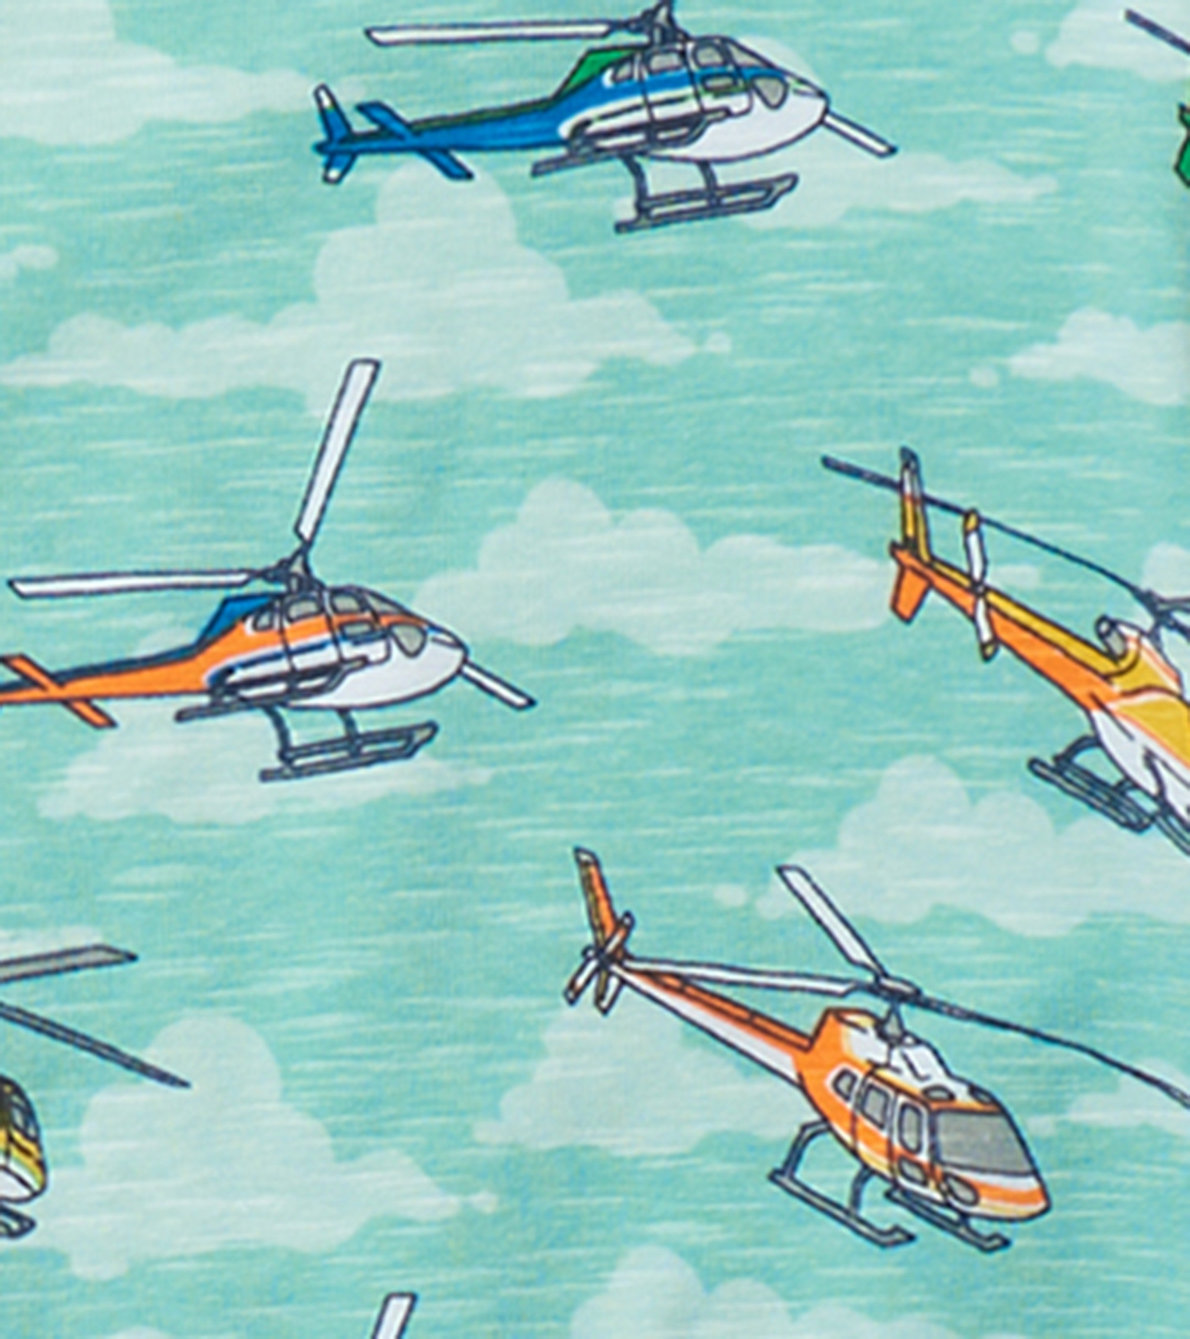 View larger image of Boys Helicopters Pajama Set